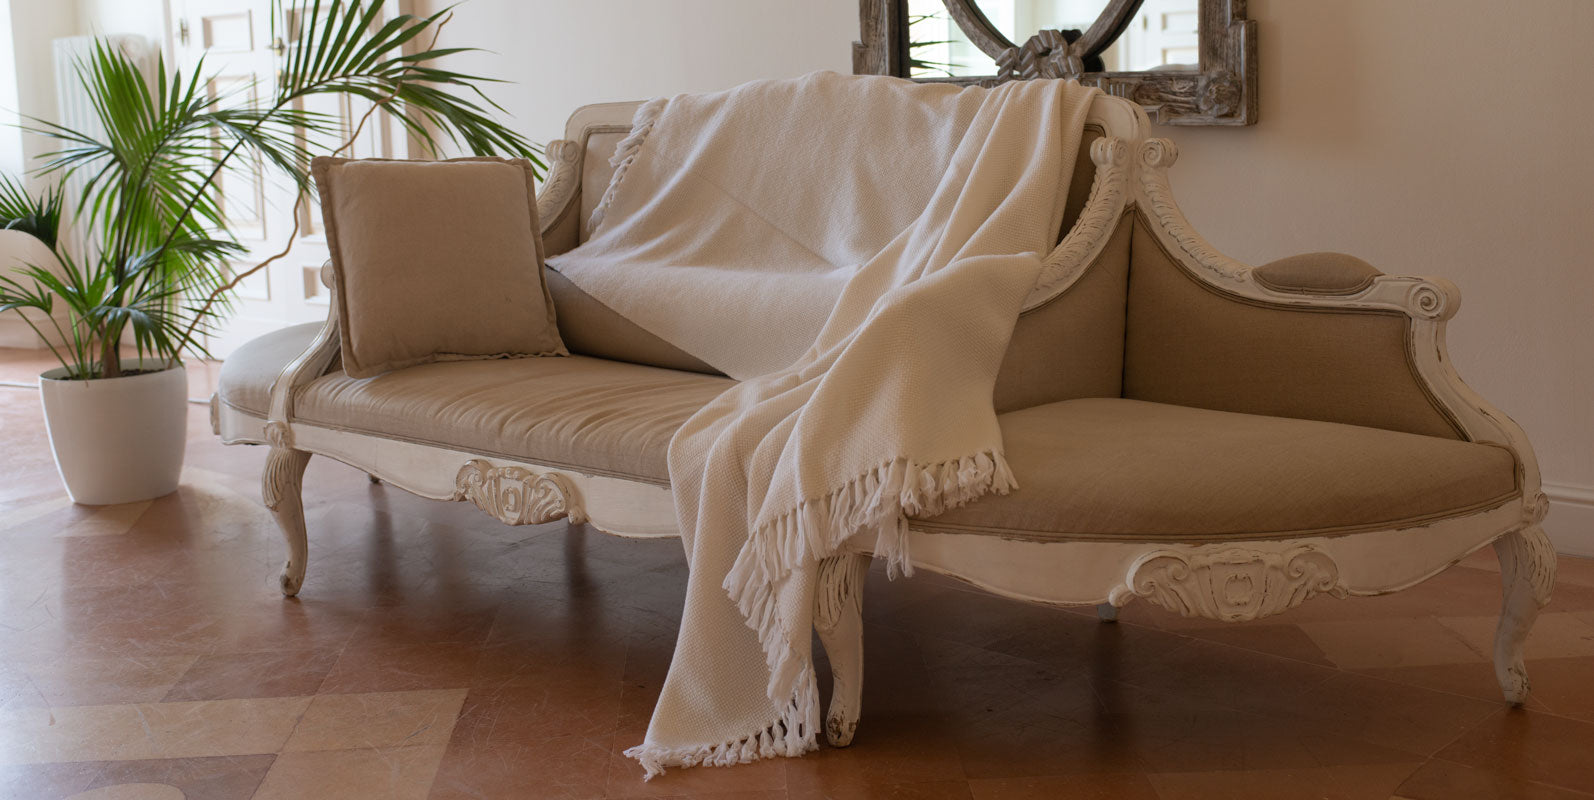 Cashmere throw in white draped over a chaise longue